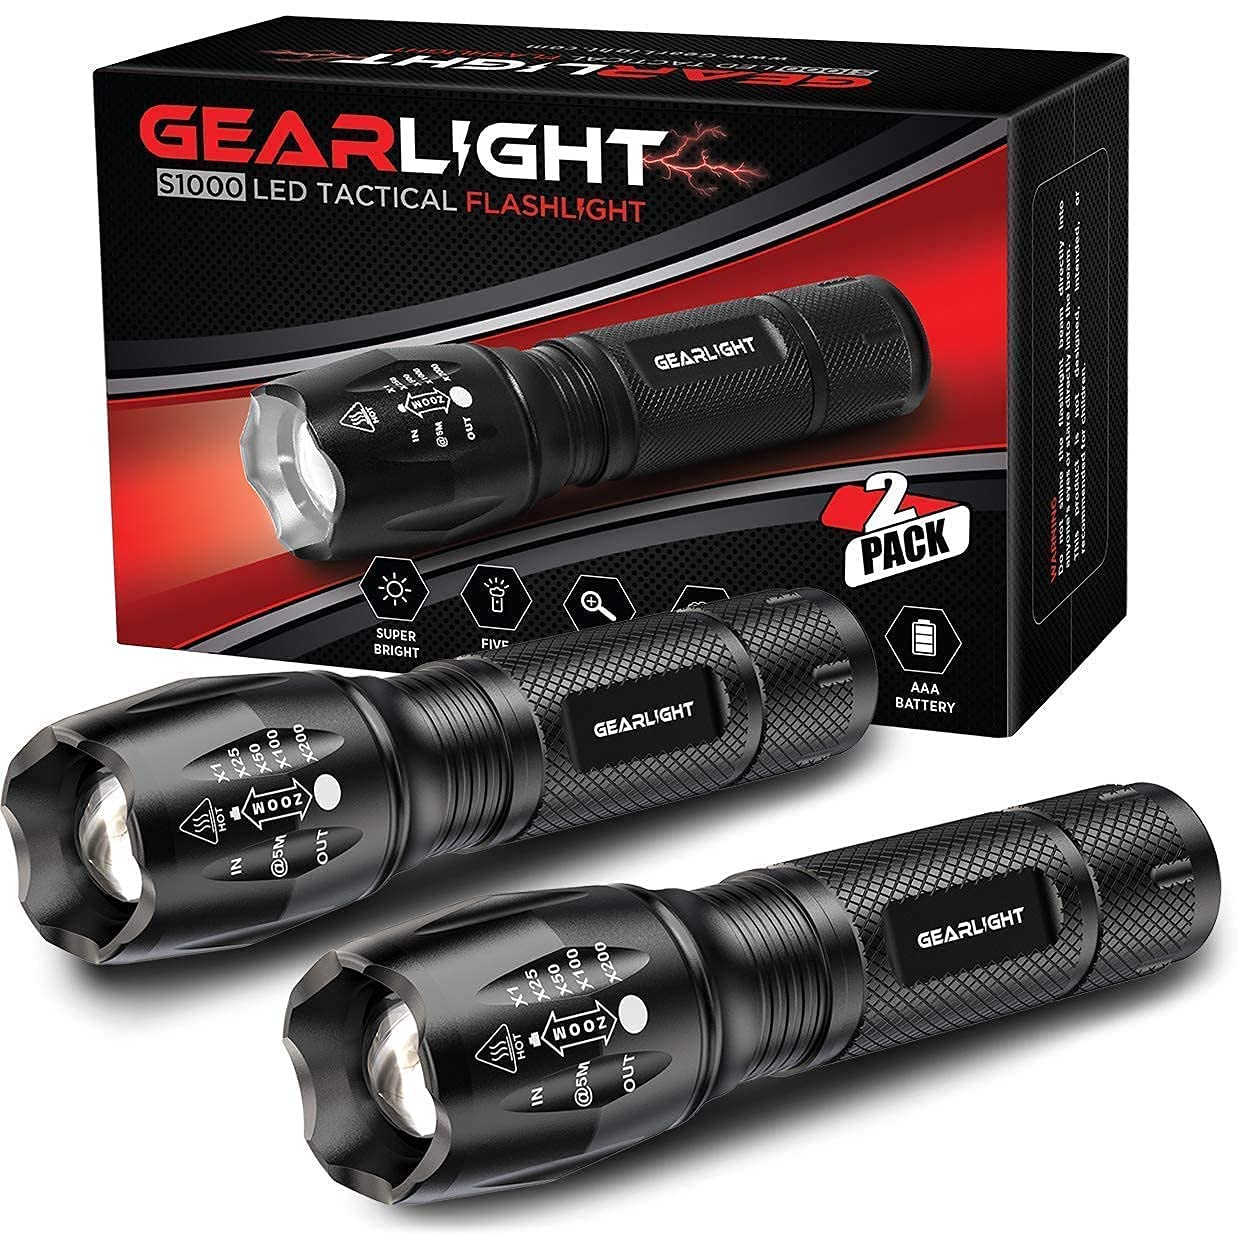 GearLight S1000 LED Tactical Flashlight with Holster [2 Pack] + GearLight S500 LED Headlamp [2 Pack] Bundle